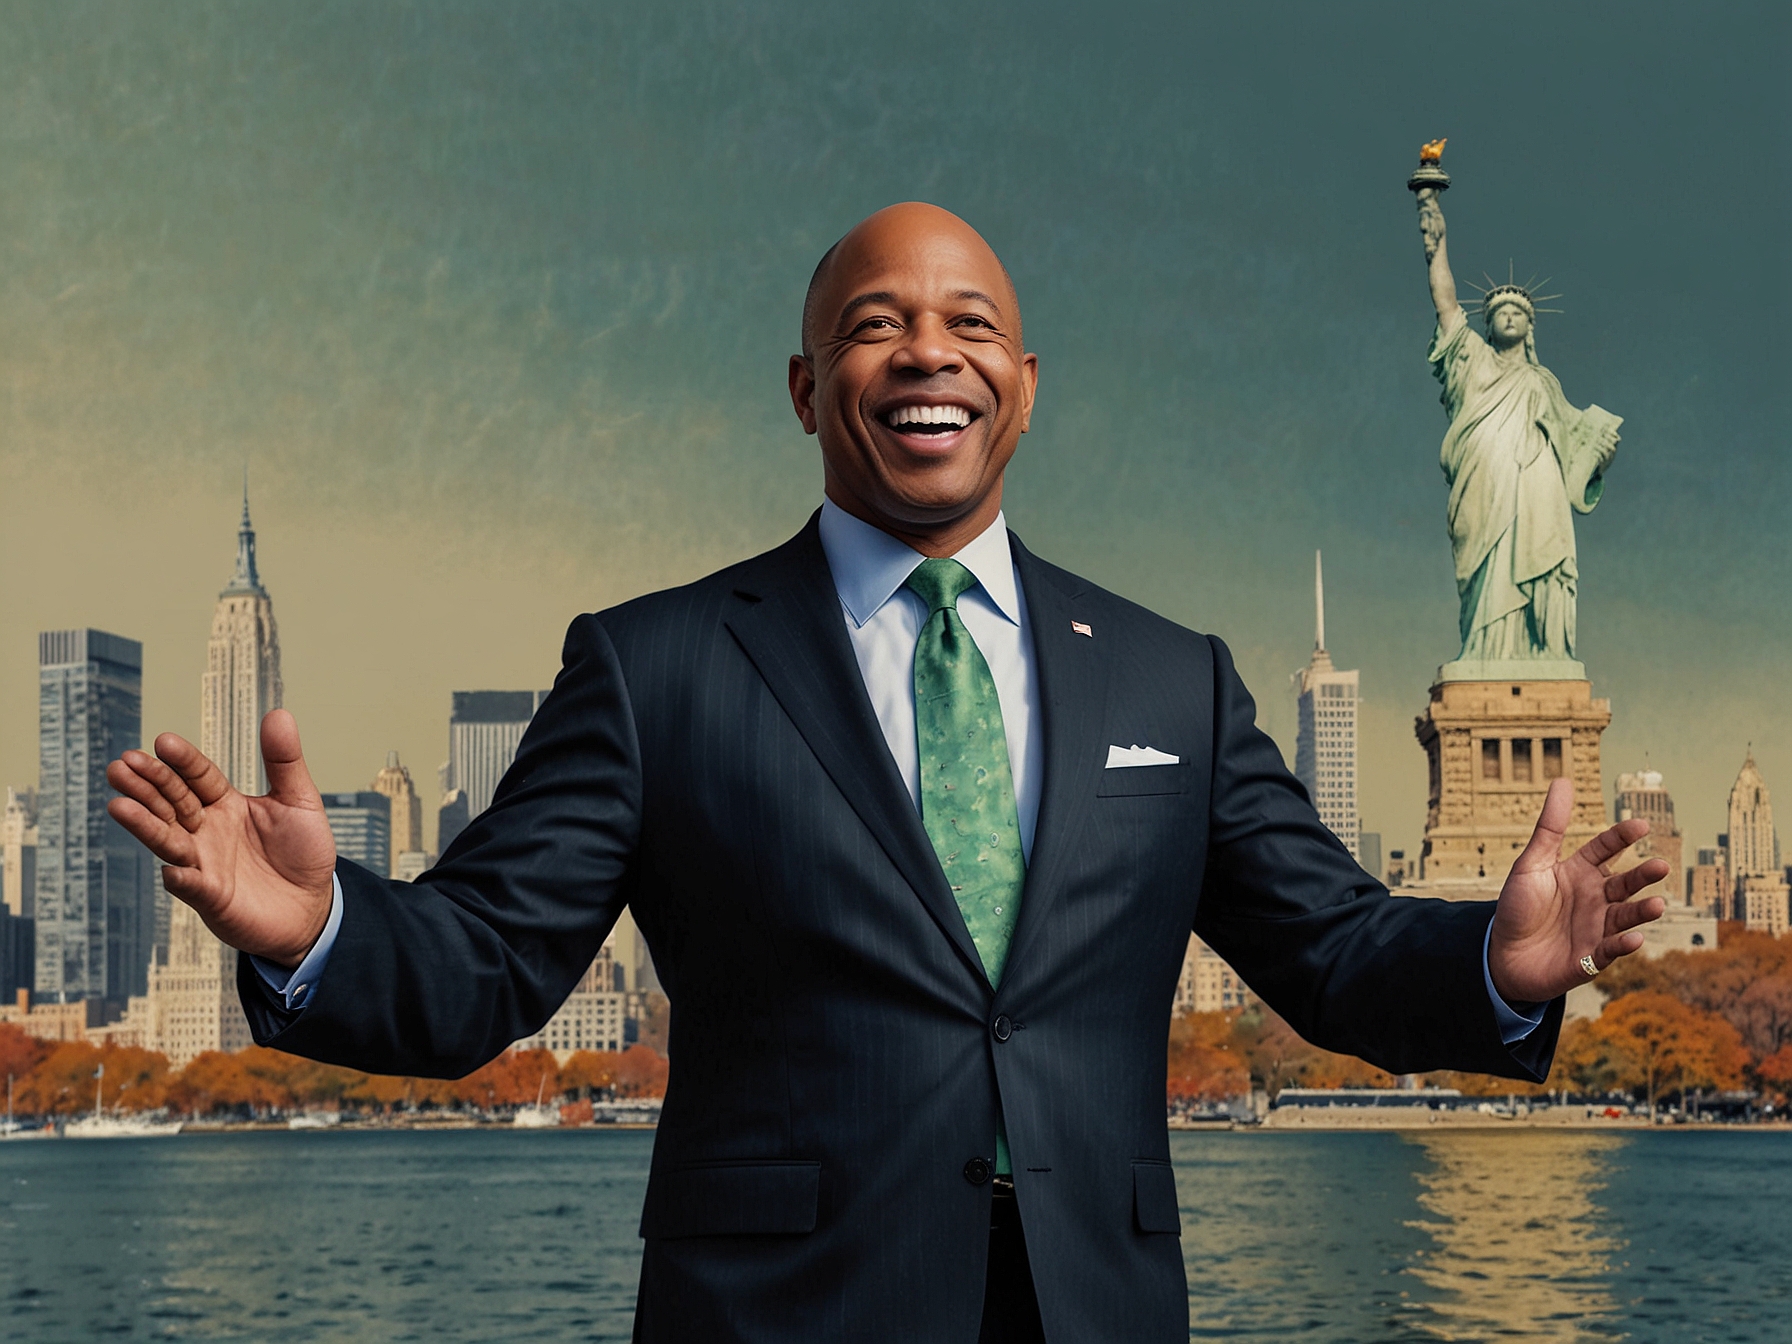 Illustration of Mayor Eric Adams celebrating the finalization of New York City's record-setting $112.4 billion budget amidst concerns of unsustainable spending.